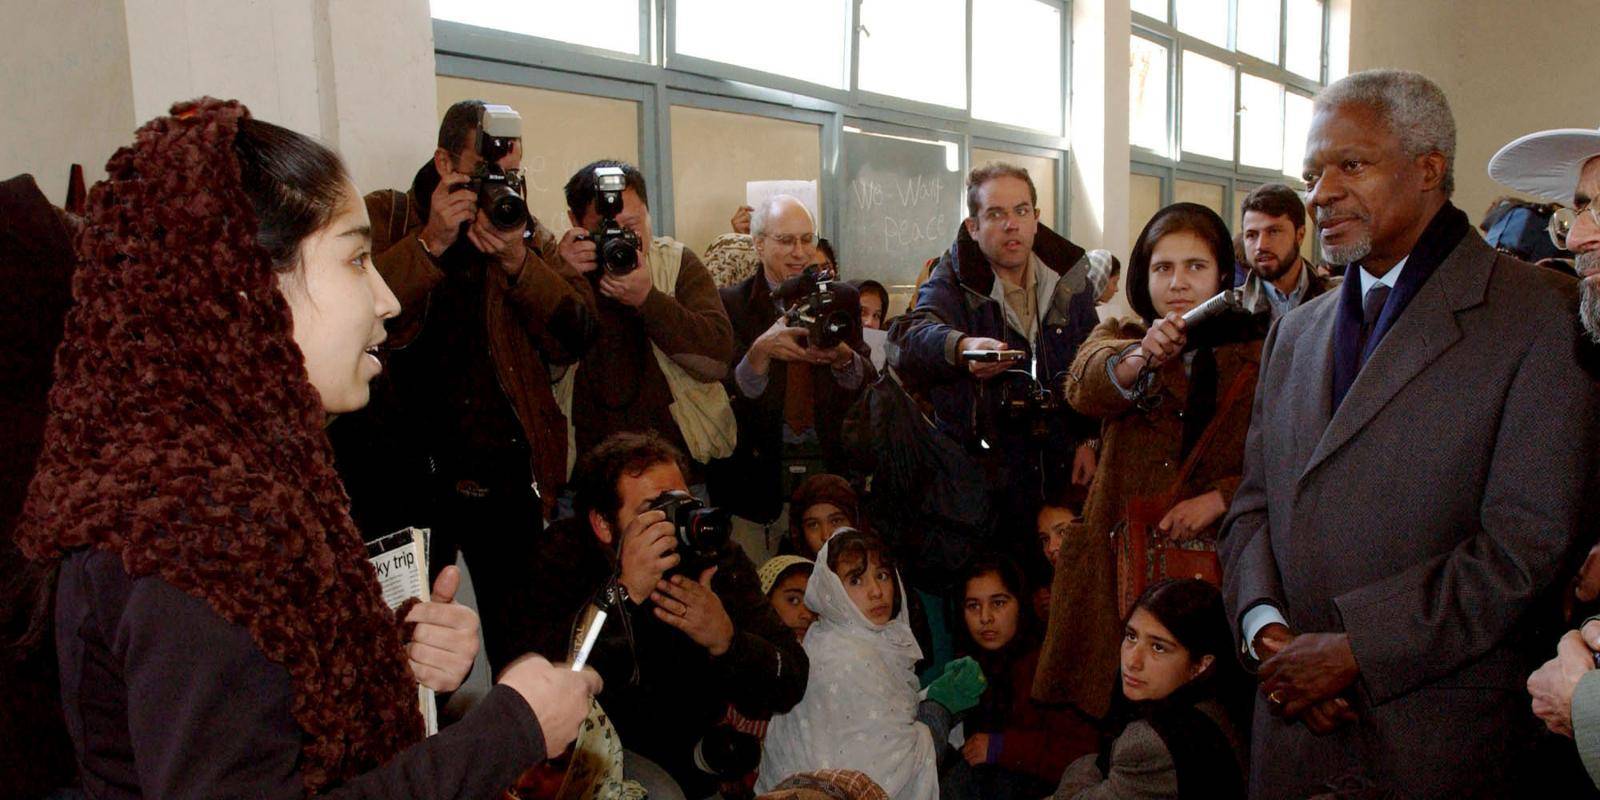 Cover image: Kofi Annan meets with high-school students in Kabul, Afghanistan, in January 2002. Copyright © Chien-min Chung/Getty Photos